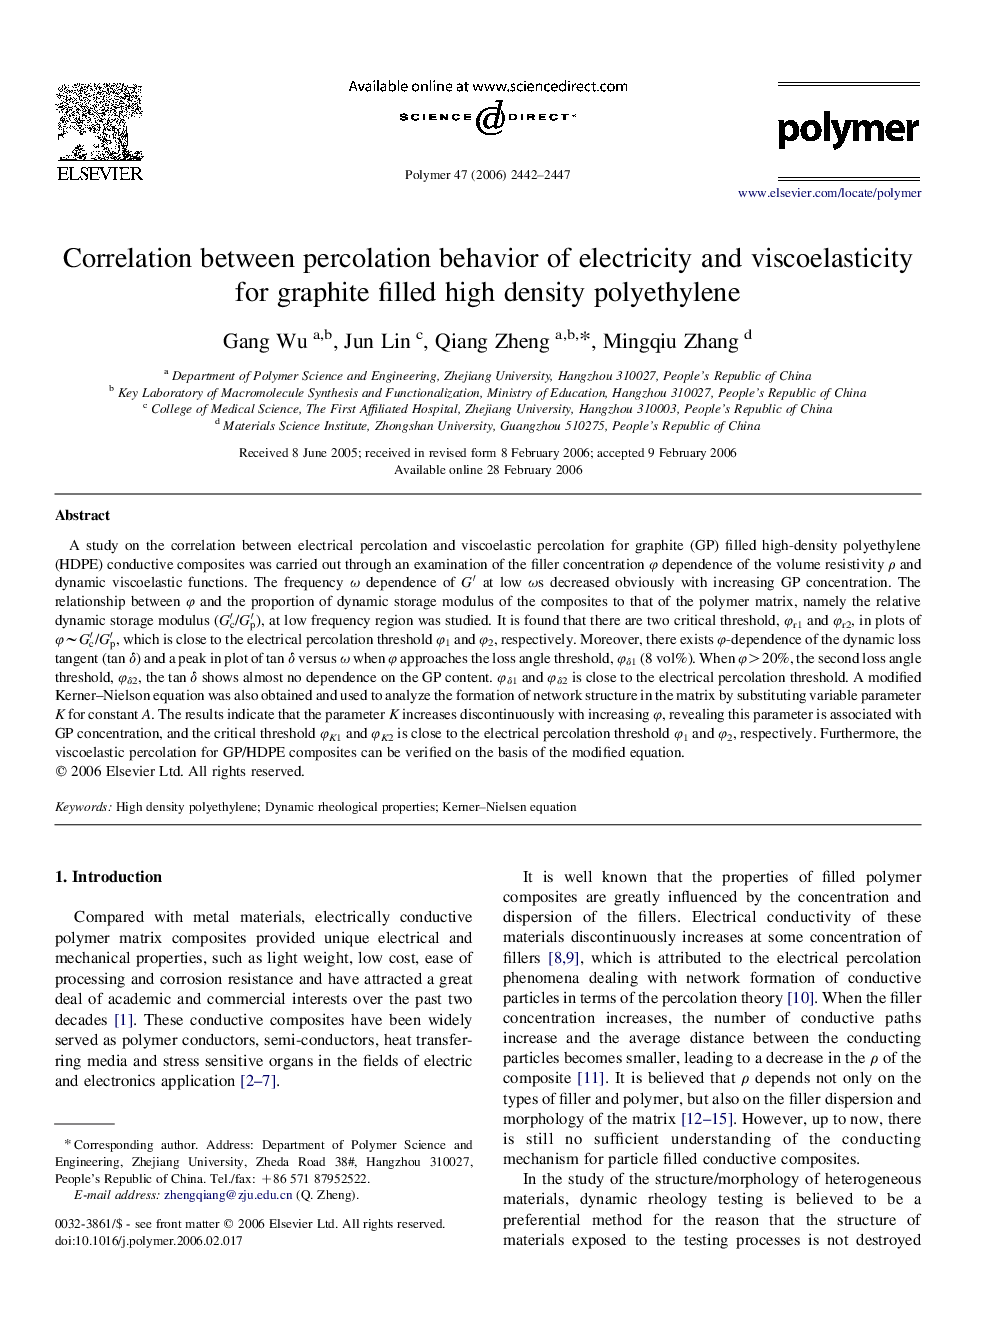 Correlation between percolation behavior of electricity and viscoelasticity for graphite filled high density polyethylene